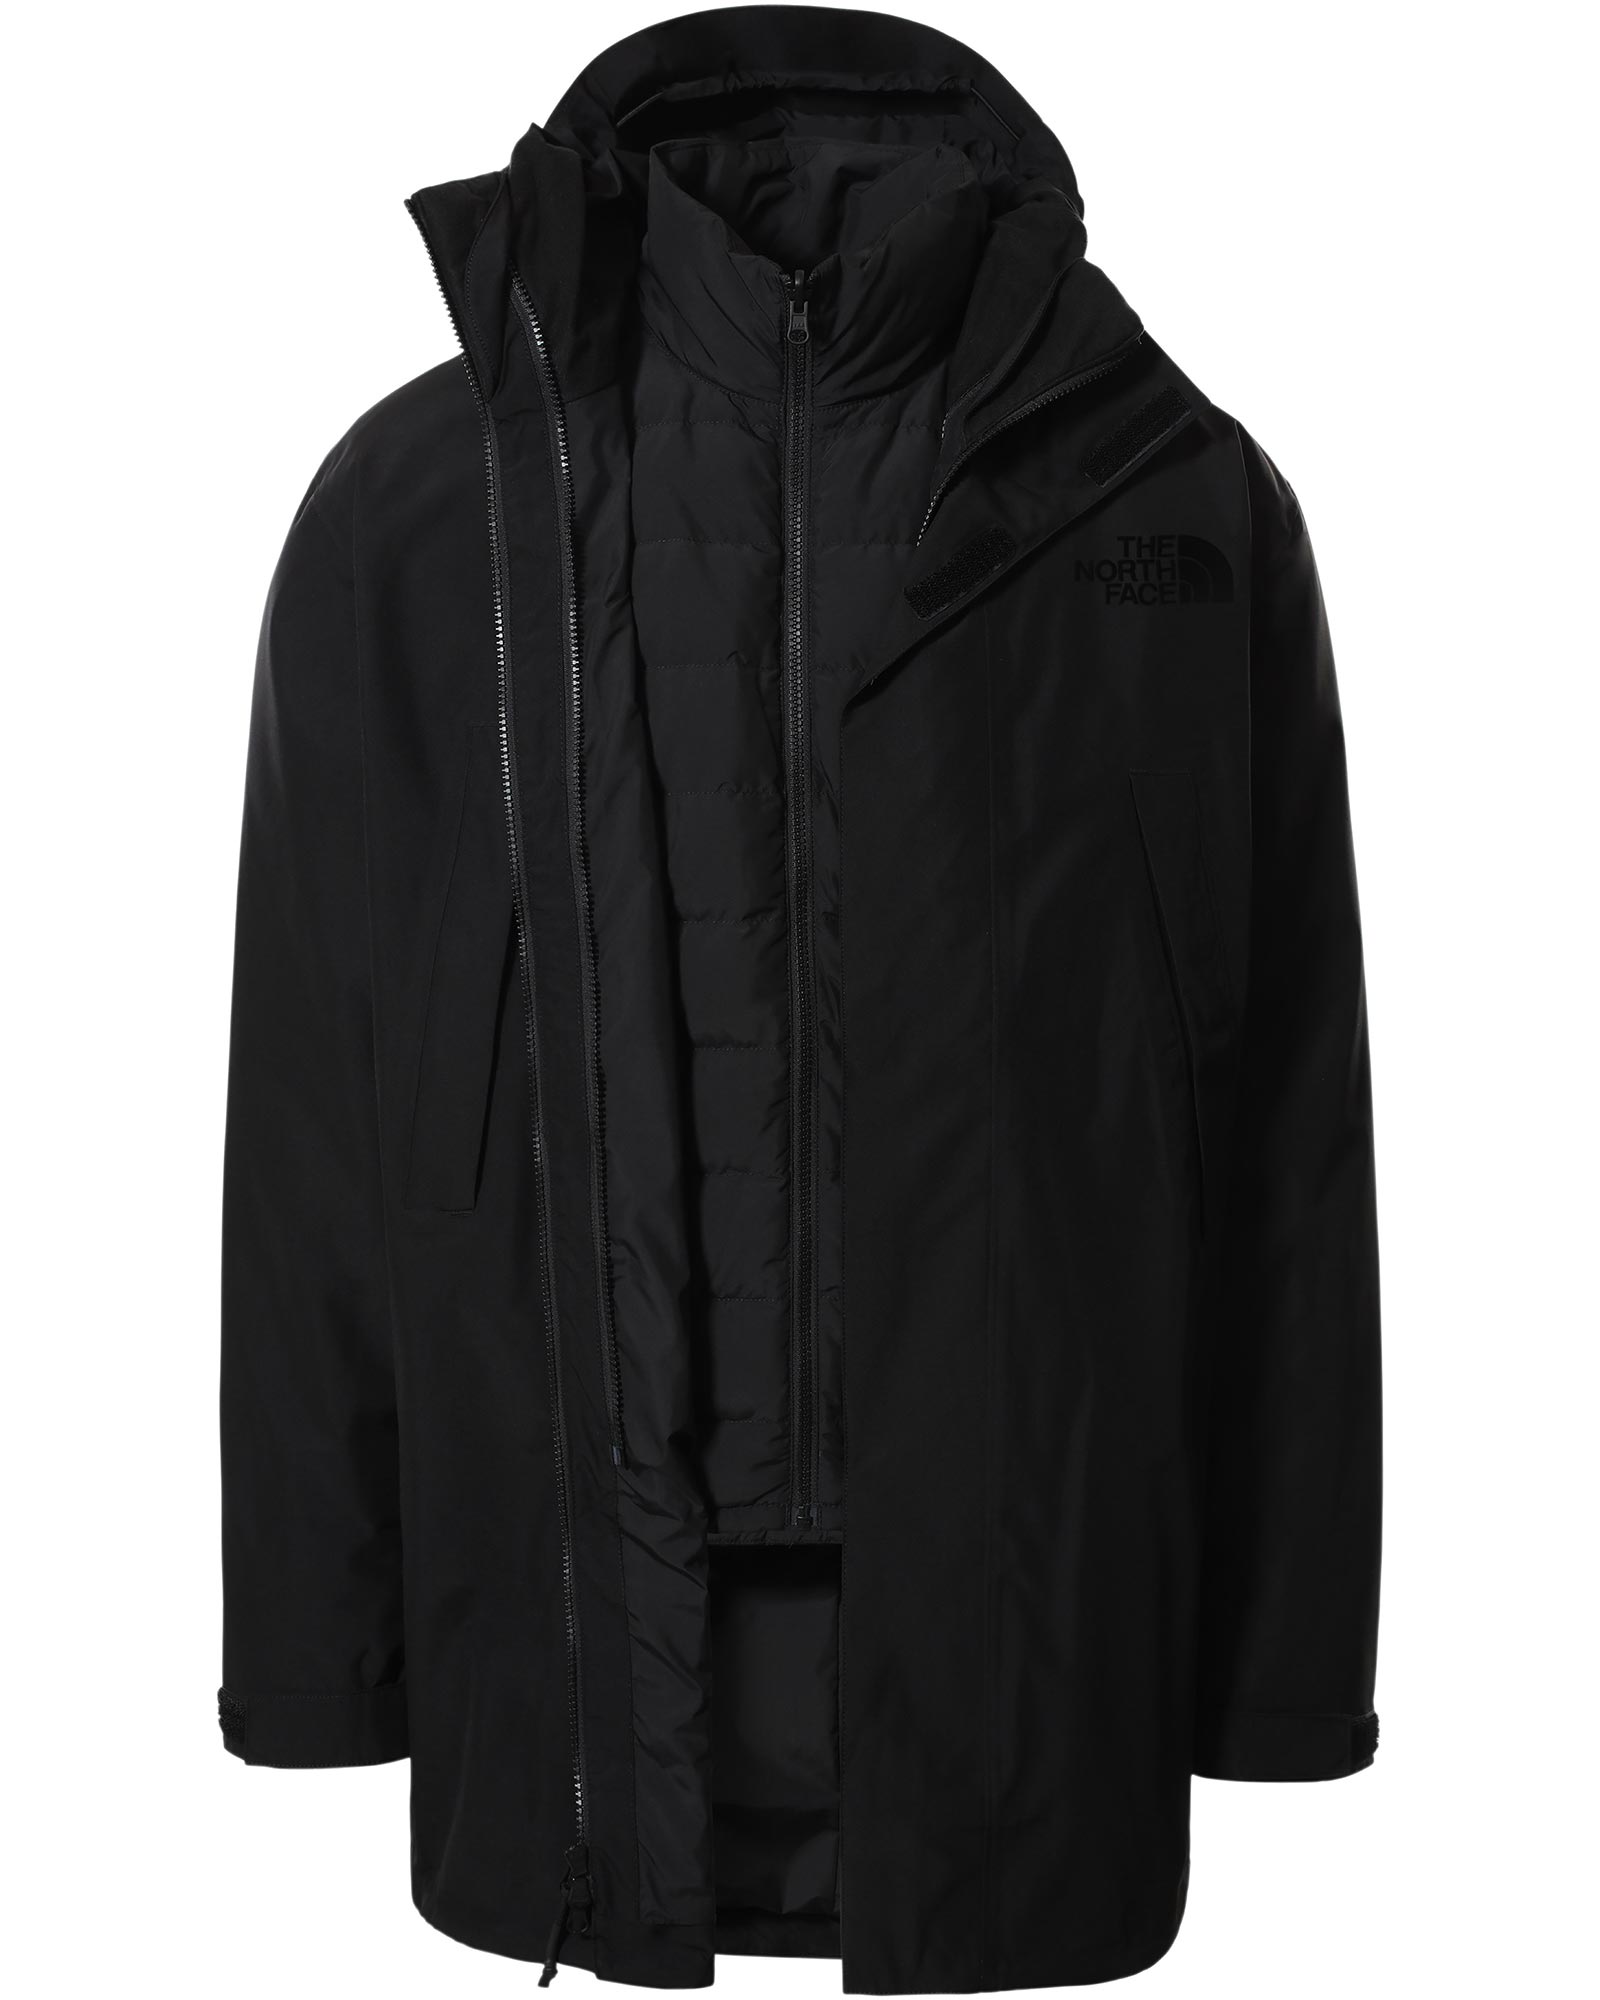 The North Face Arctic Men’s Triclimate Parka Jacket - TNF Black S